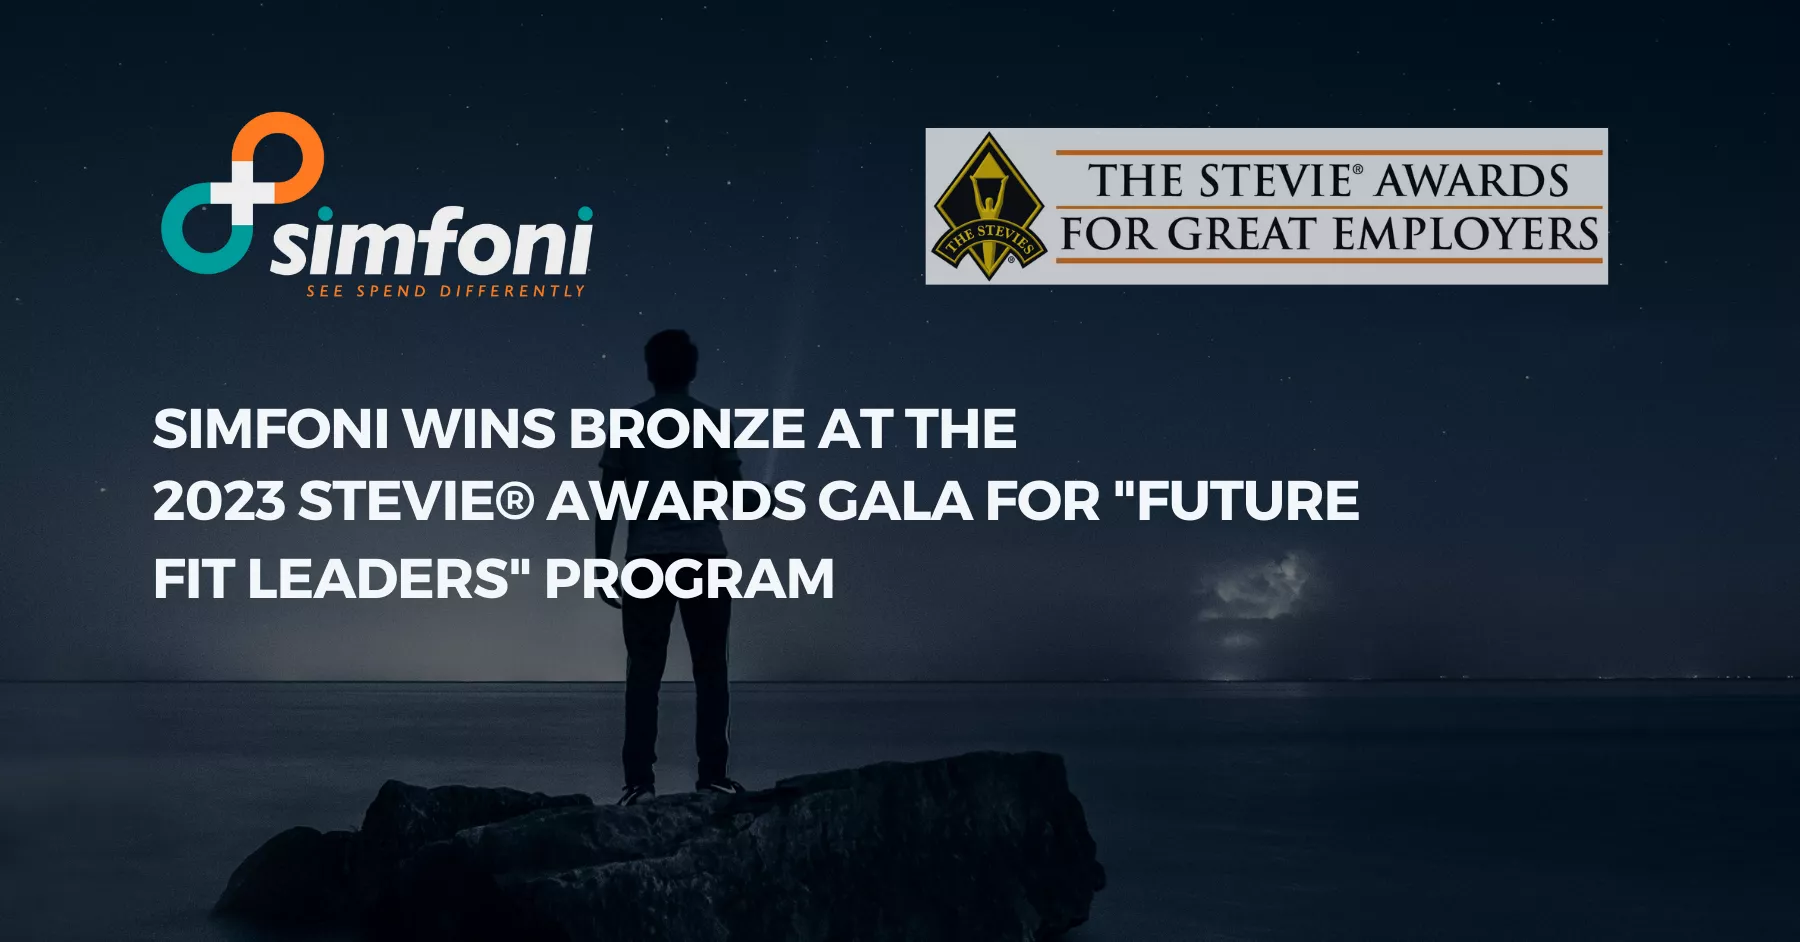 Simfoni Wins Bronze at the 2023 Stevie® Awards Gala for “Future Fit Leaders” Program